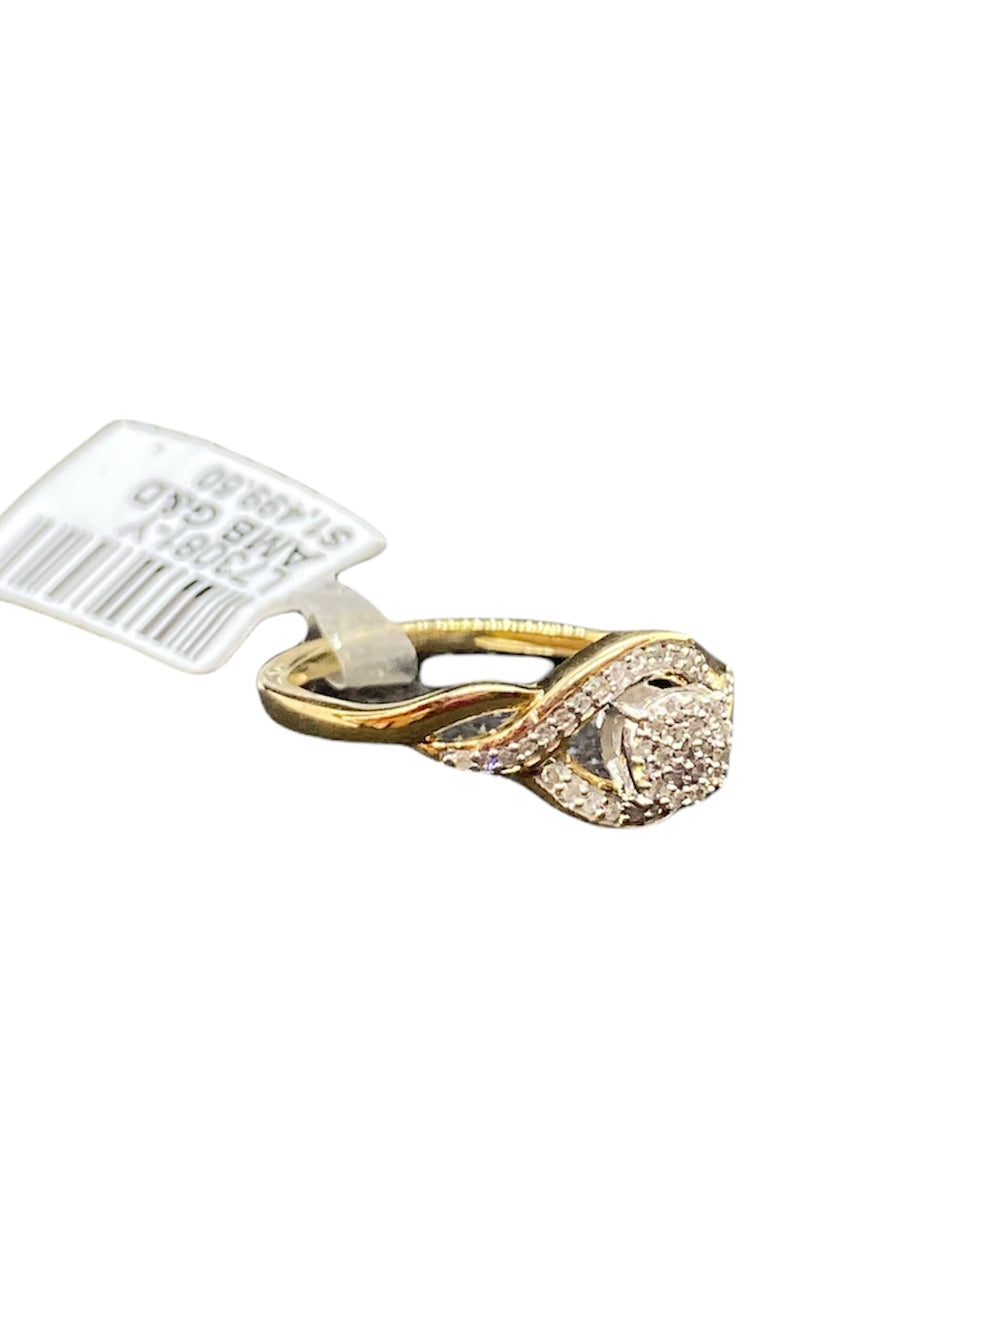 10kt Gold and Diamond women’s ring of 0.15 CTW available on special sale